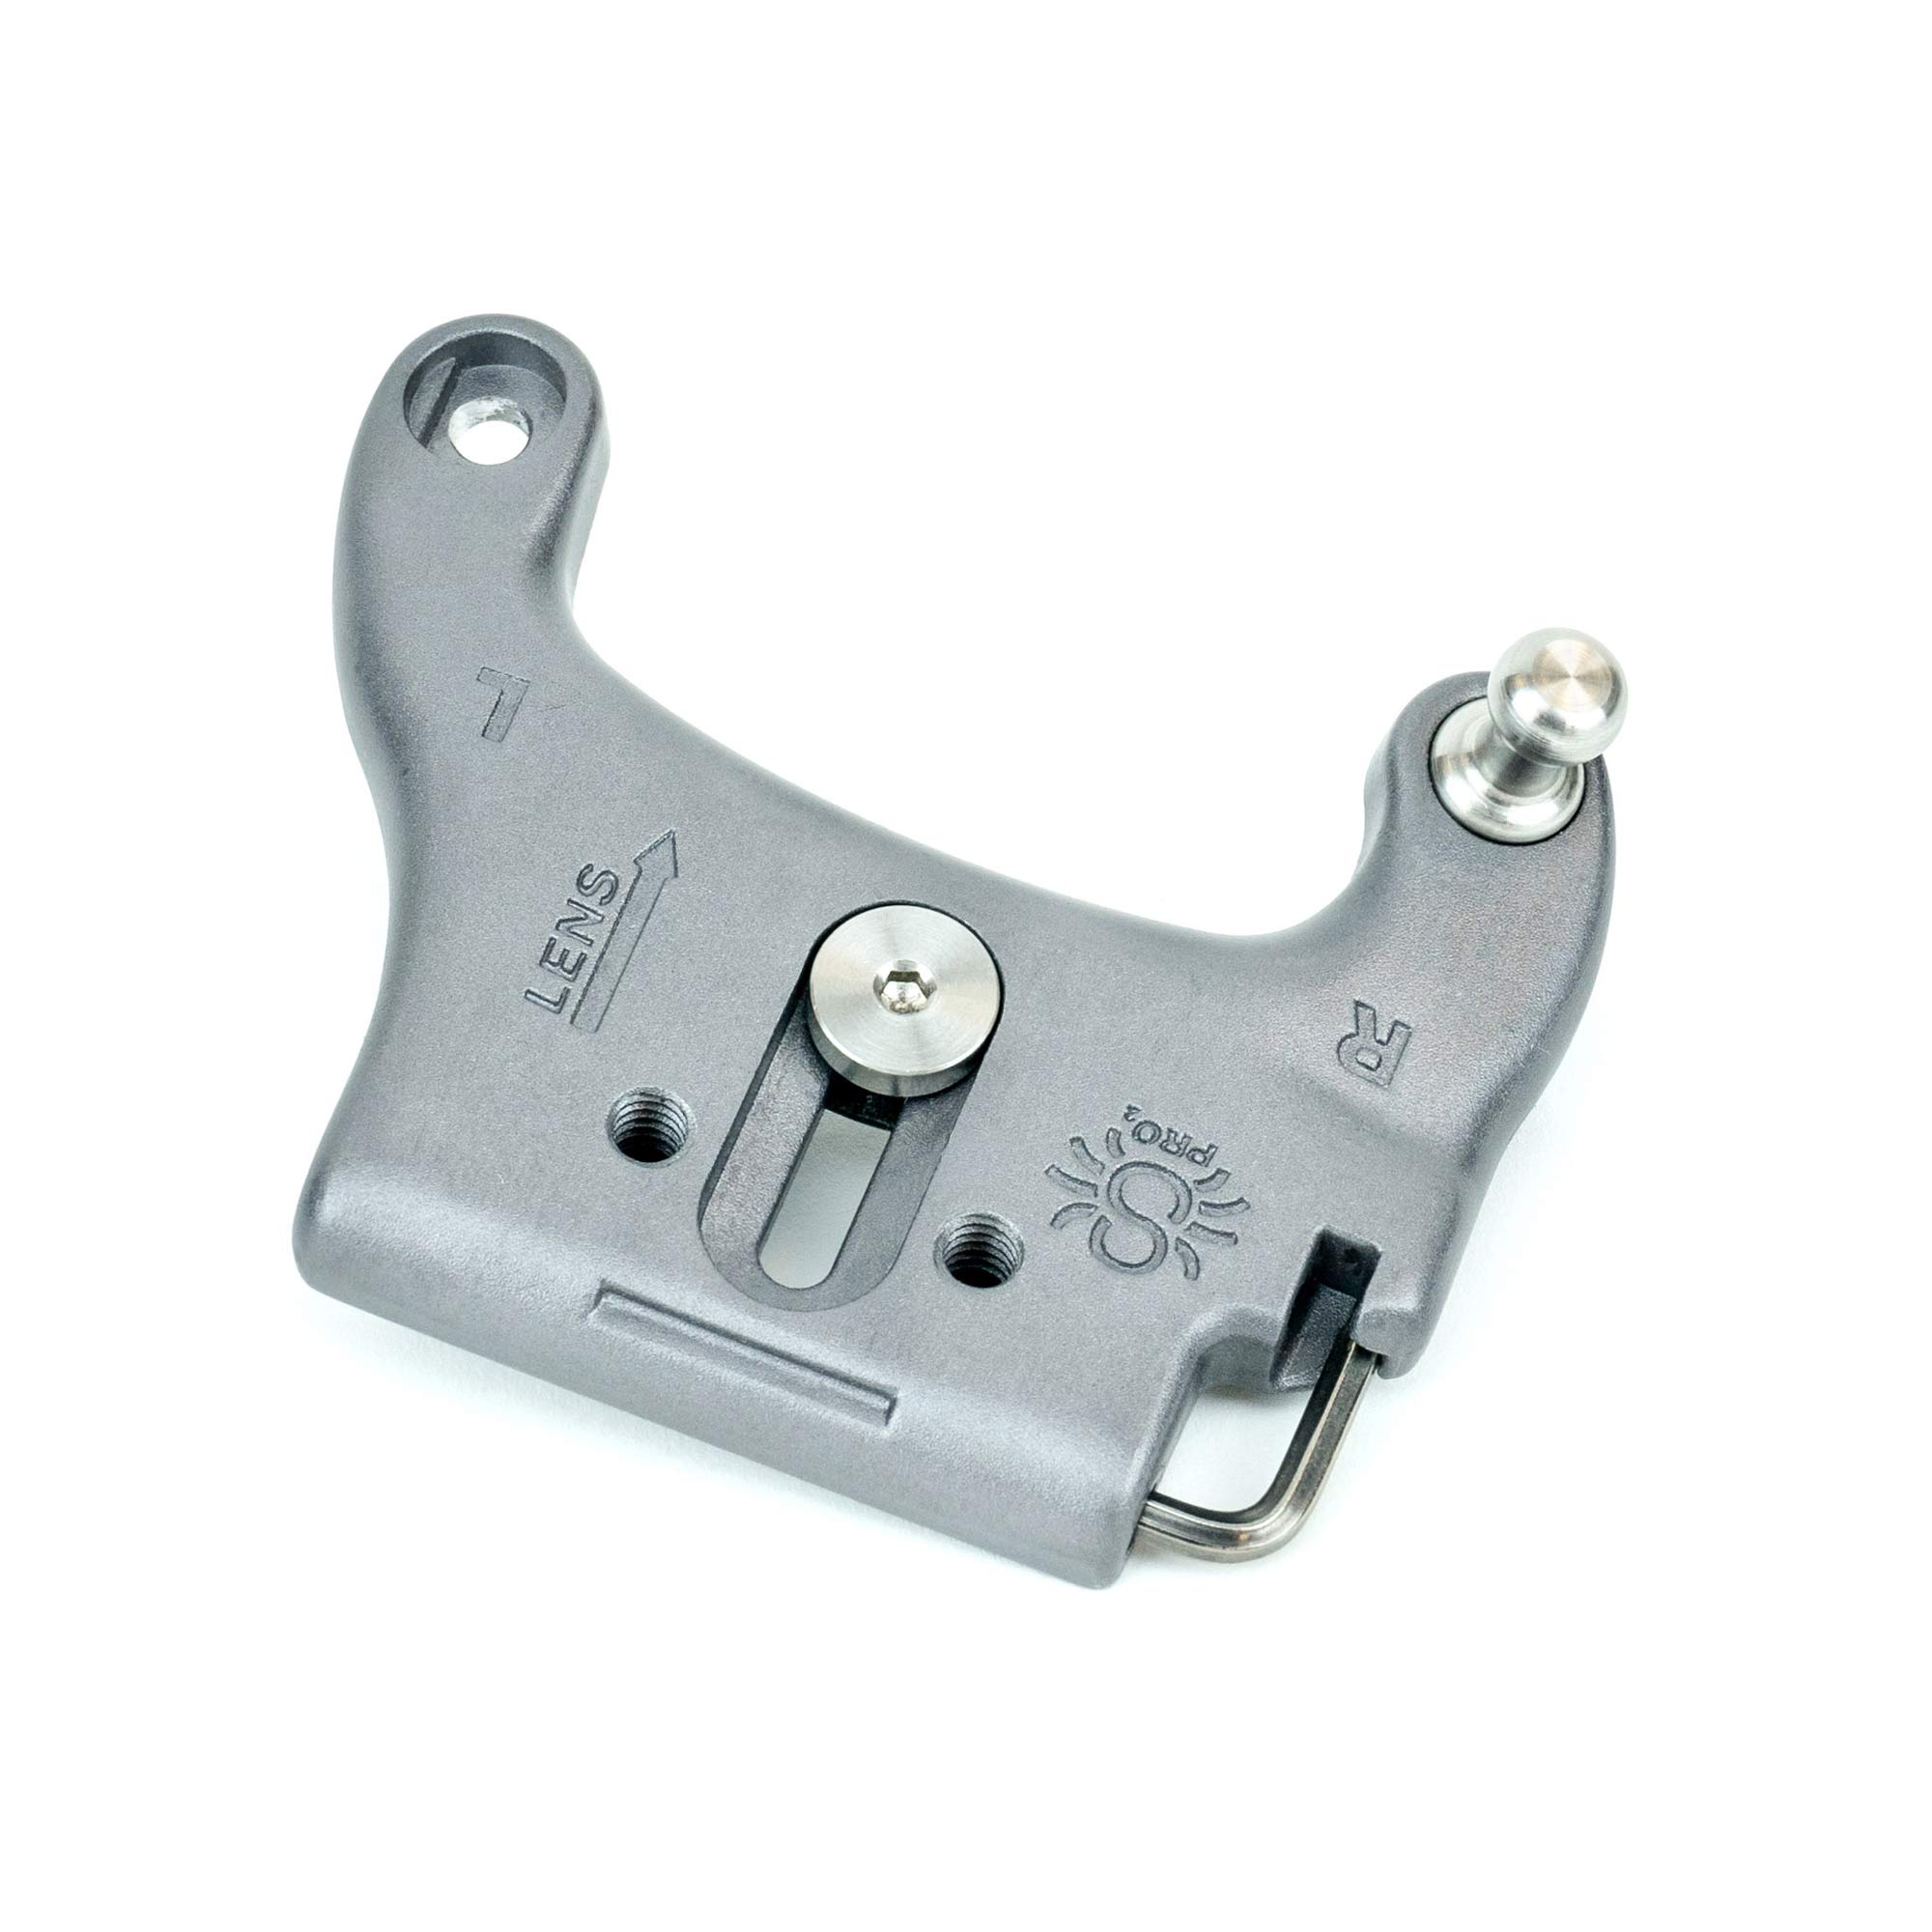 Spider Camera Holster SpiderPro Plate and Pin v2